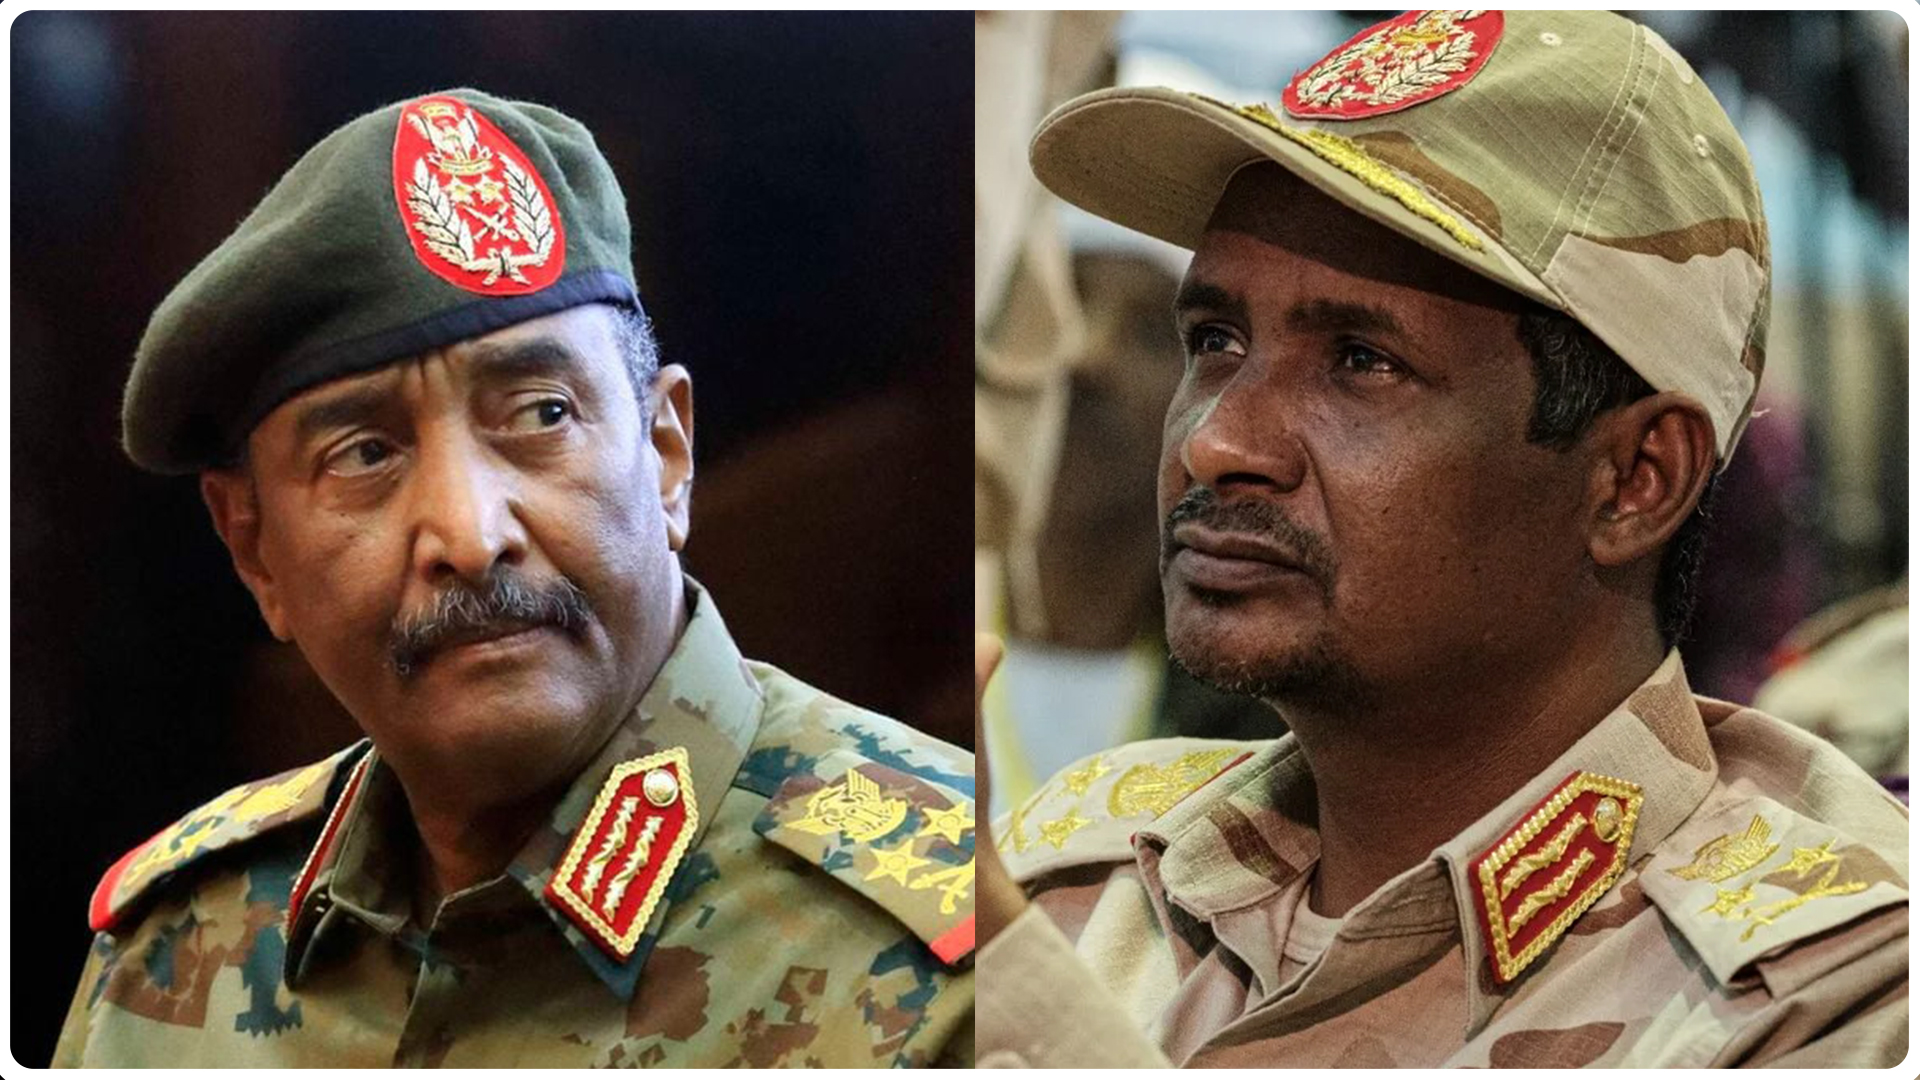 As Army and Rapid Support Forces Battle It Out, Sudanese Left Calls for Restoring the Revolution